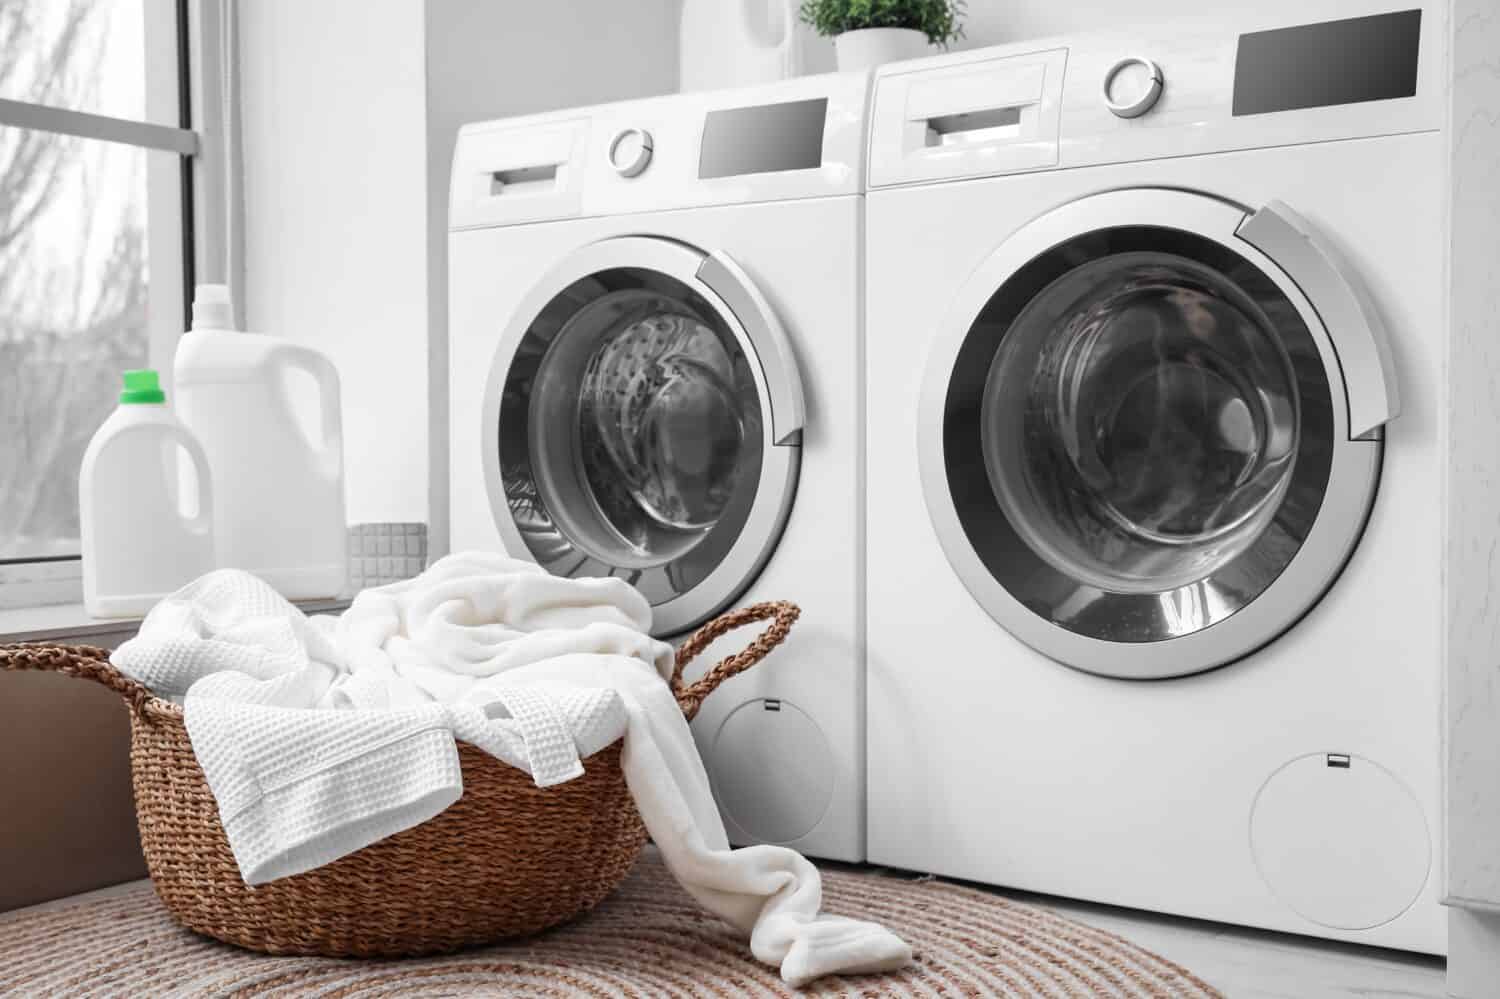 Gas Dryer vs. Electric Dryer: Pros & Cons for Each